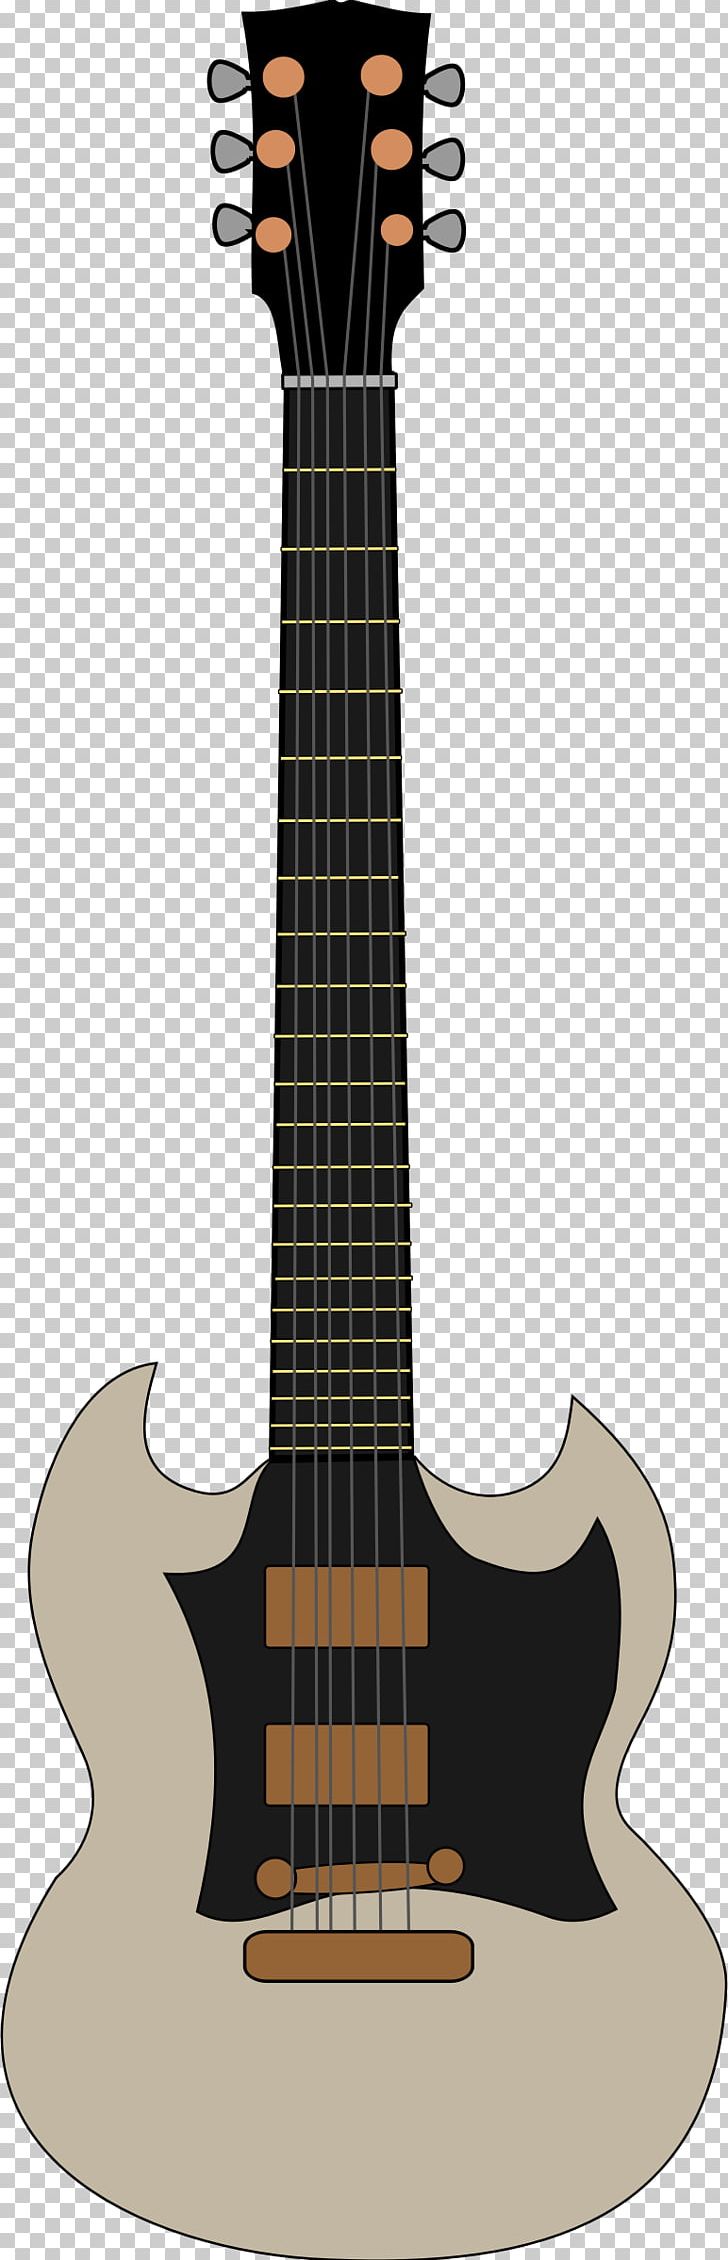 Gibson Explorer Gibson Les Paul Fender Stratocaster Gibson Flying V PNG, Clipart, Acoustic Electric Guitar, Acoustic Guitar, Bass Guitar, Cavaquinho, Cuatro Free PNG Download